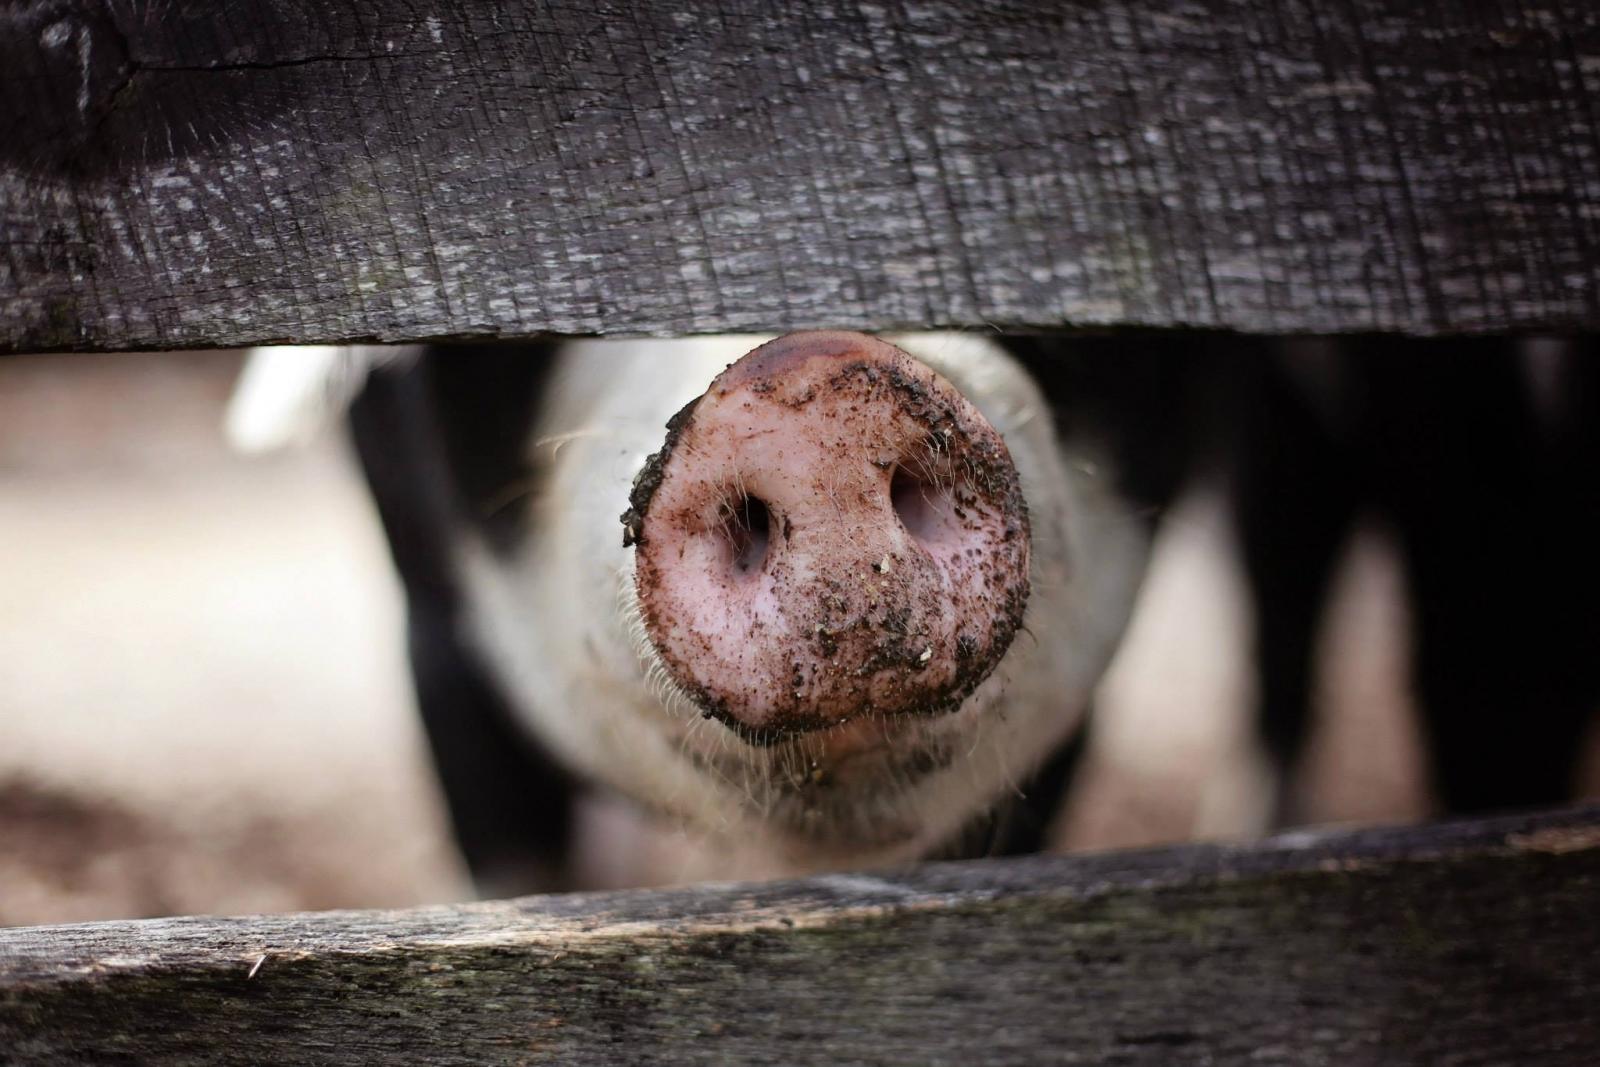 Pig in a sty. Photo credit: Pexels